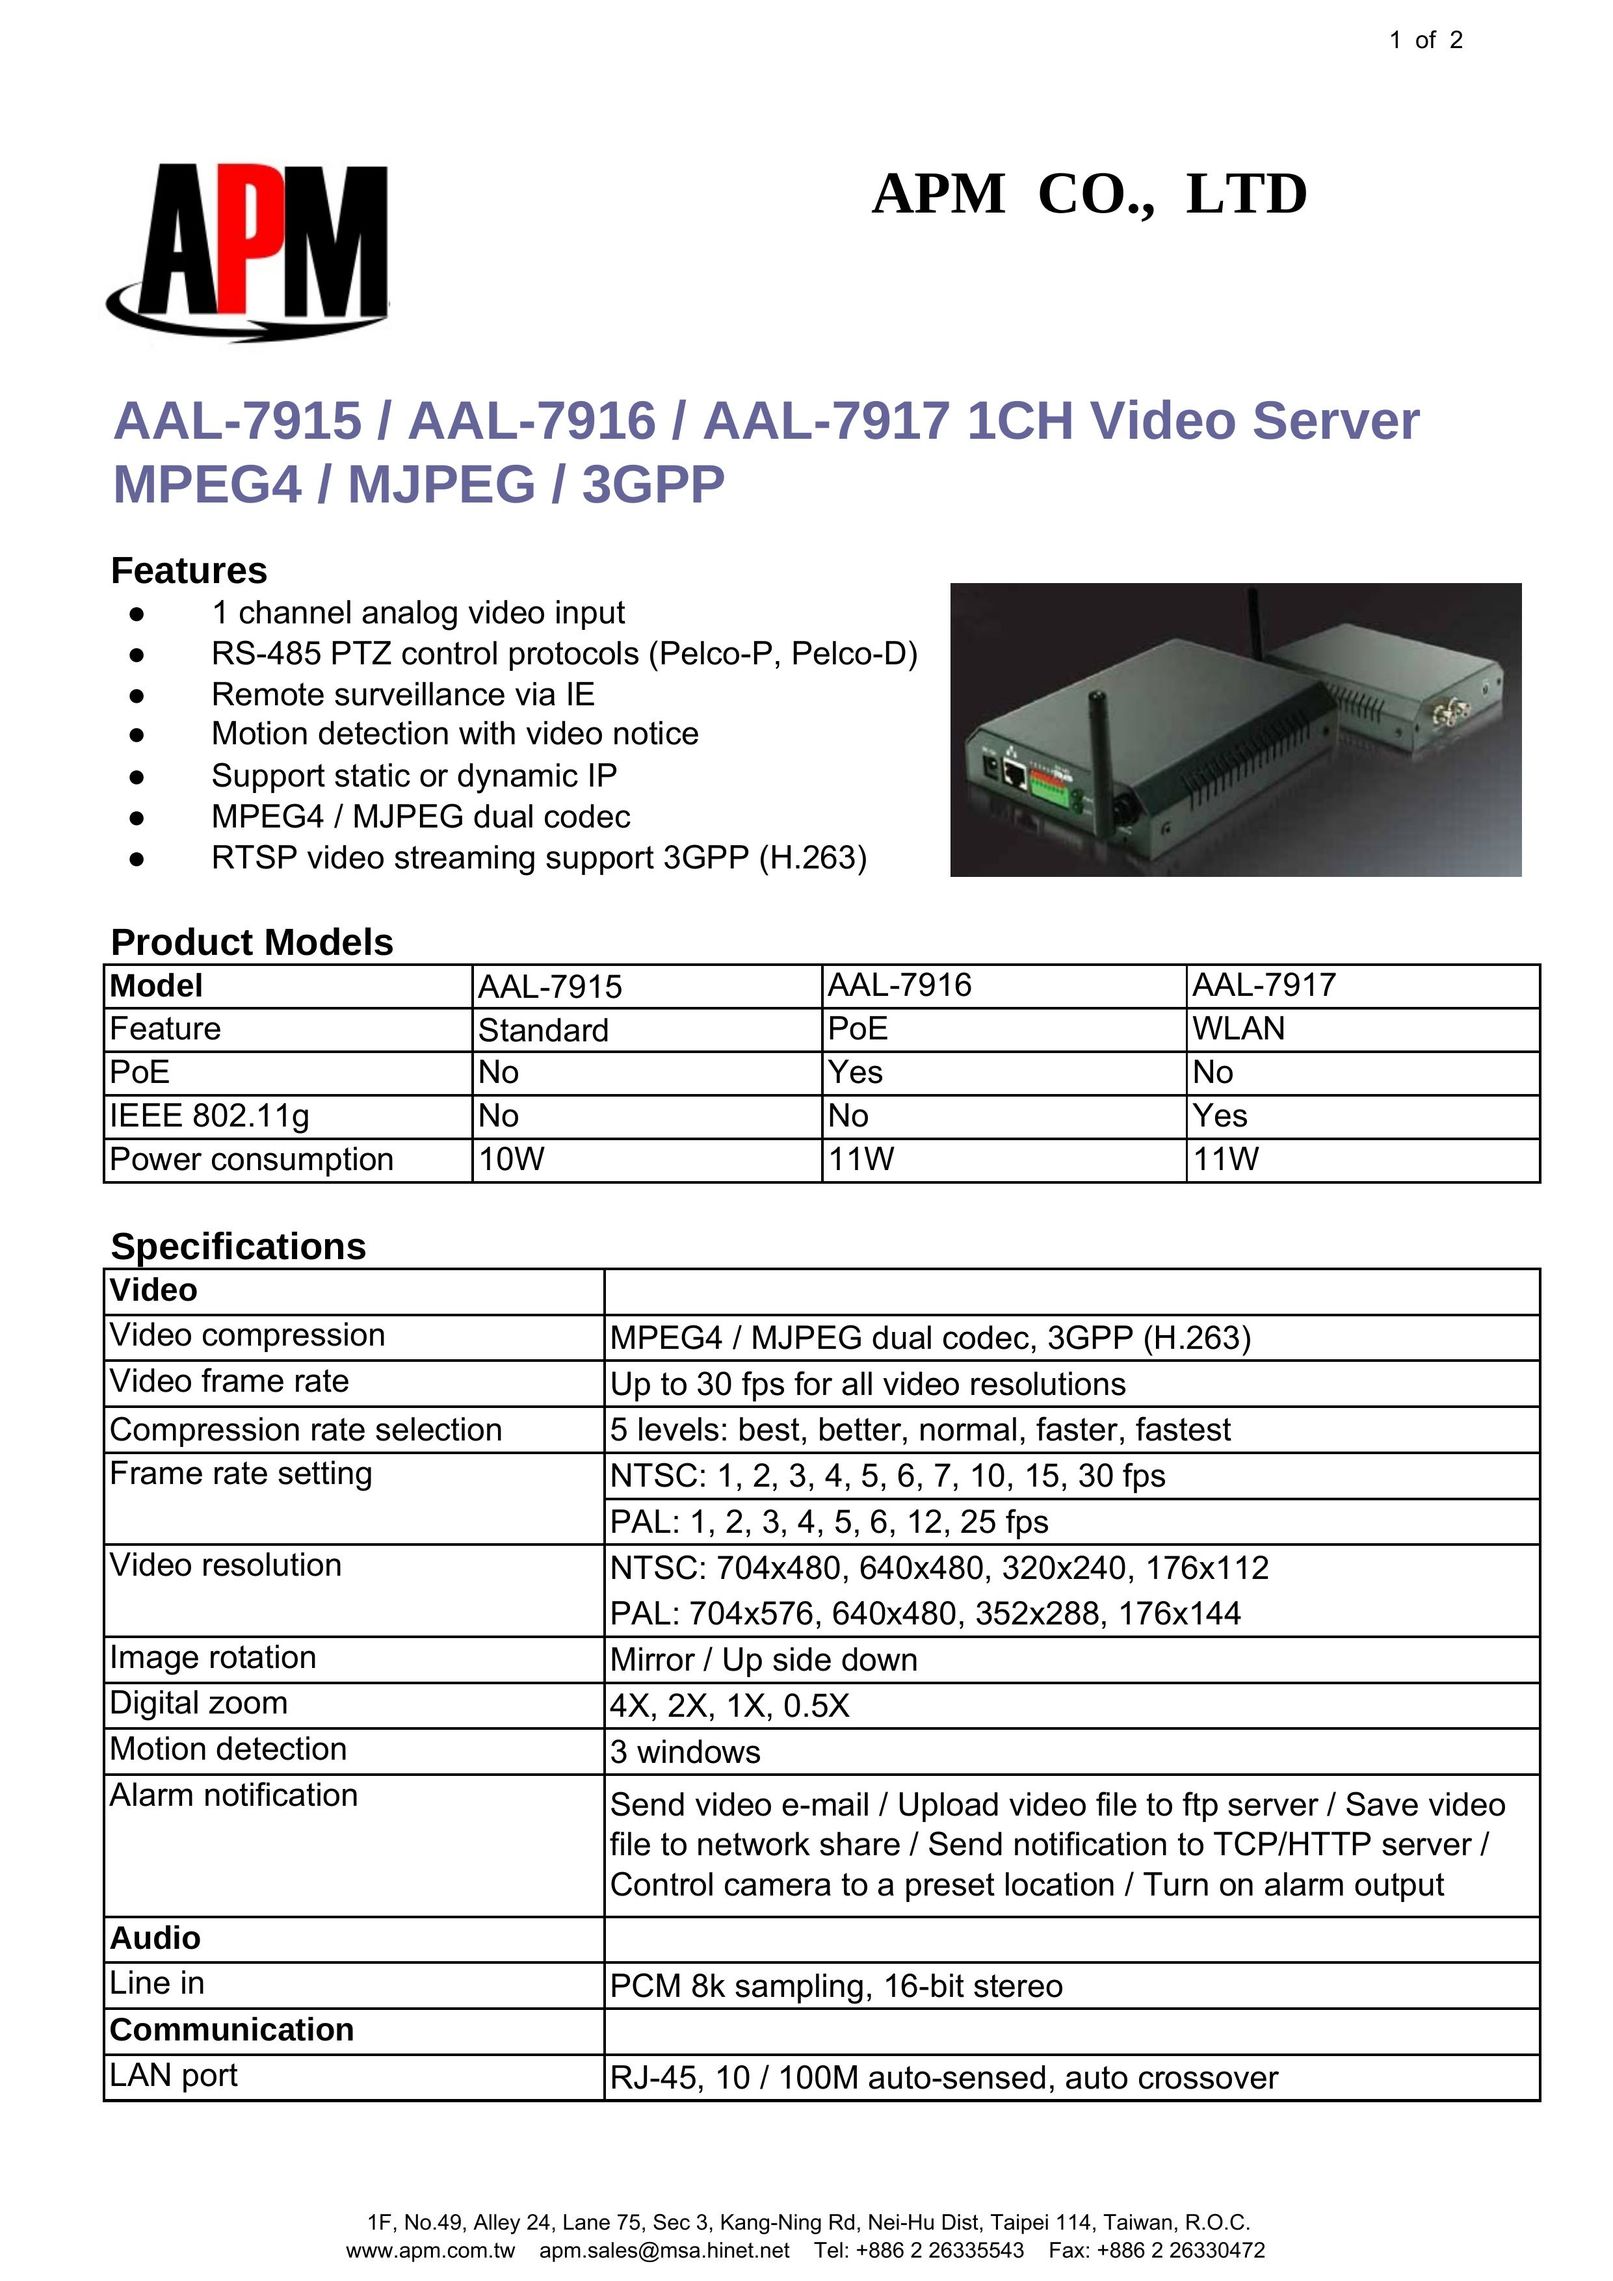 APM AAL-7917 Home Theater Server User Manual